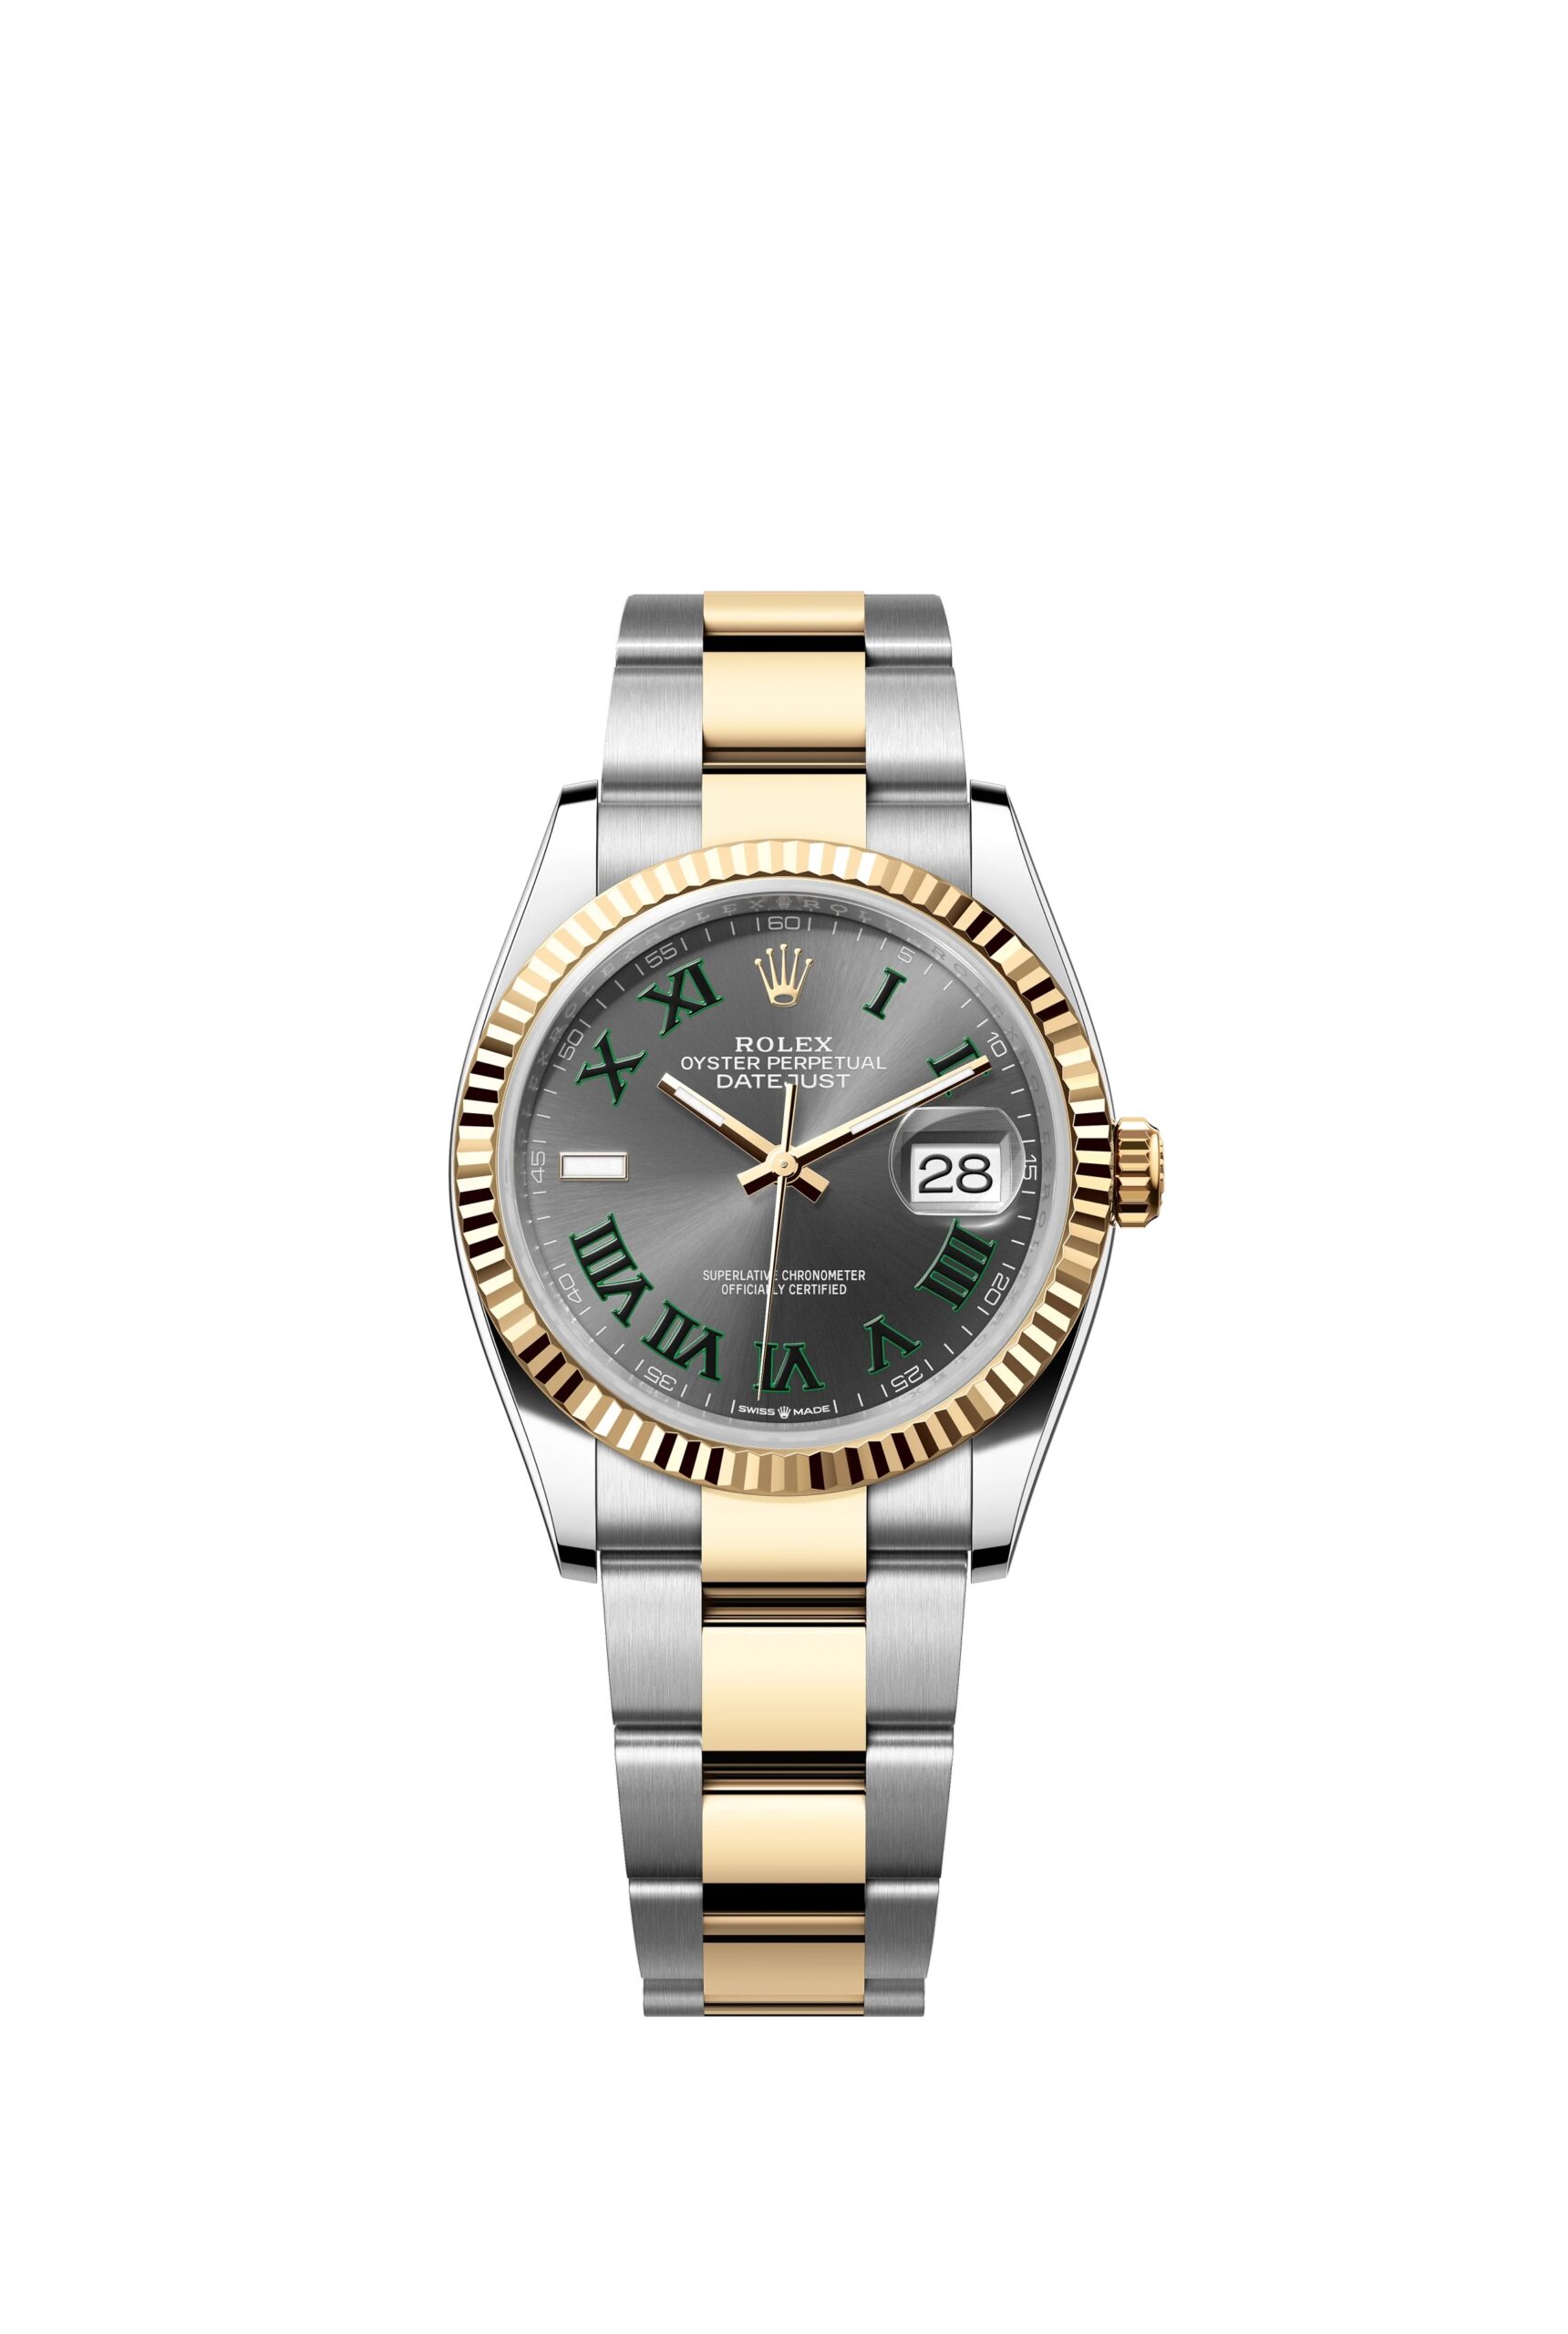 Rolex Datejust 36 Oyster, 36 mm, Oystersteel and yellow gold Reference 126233